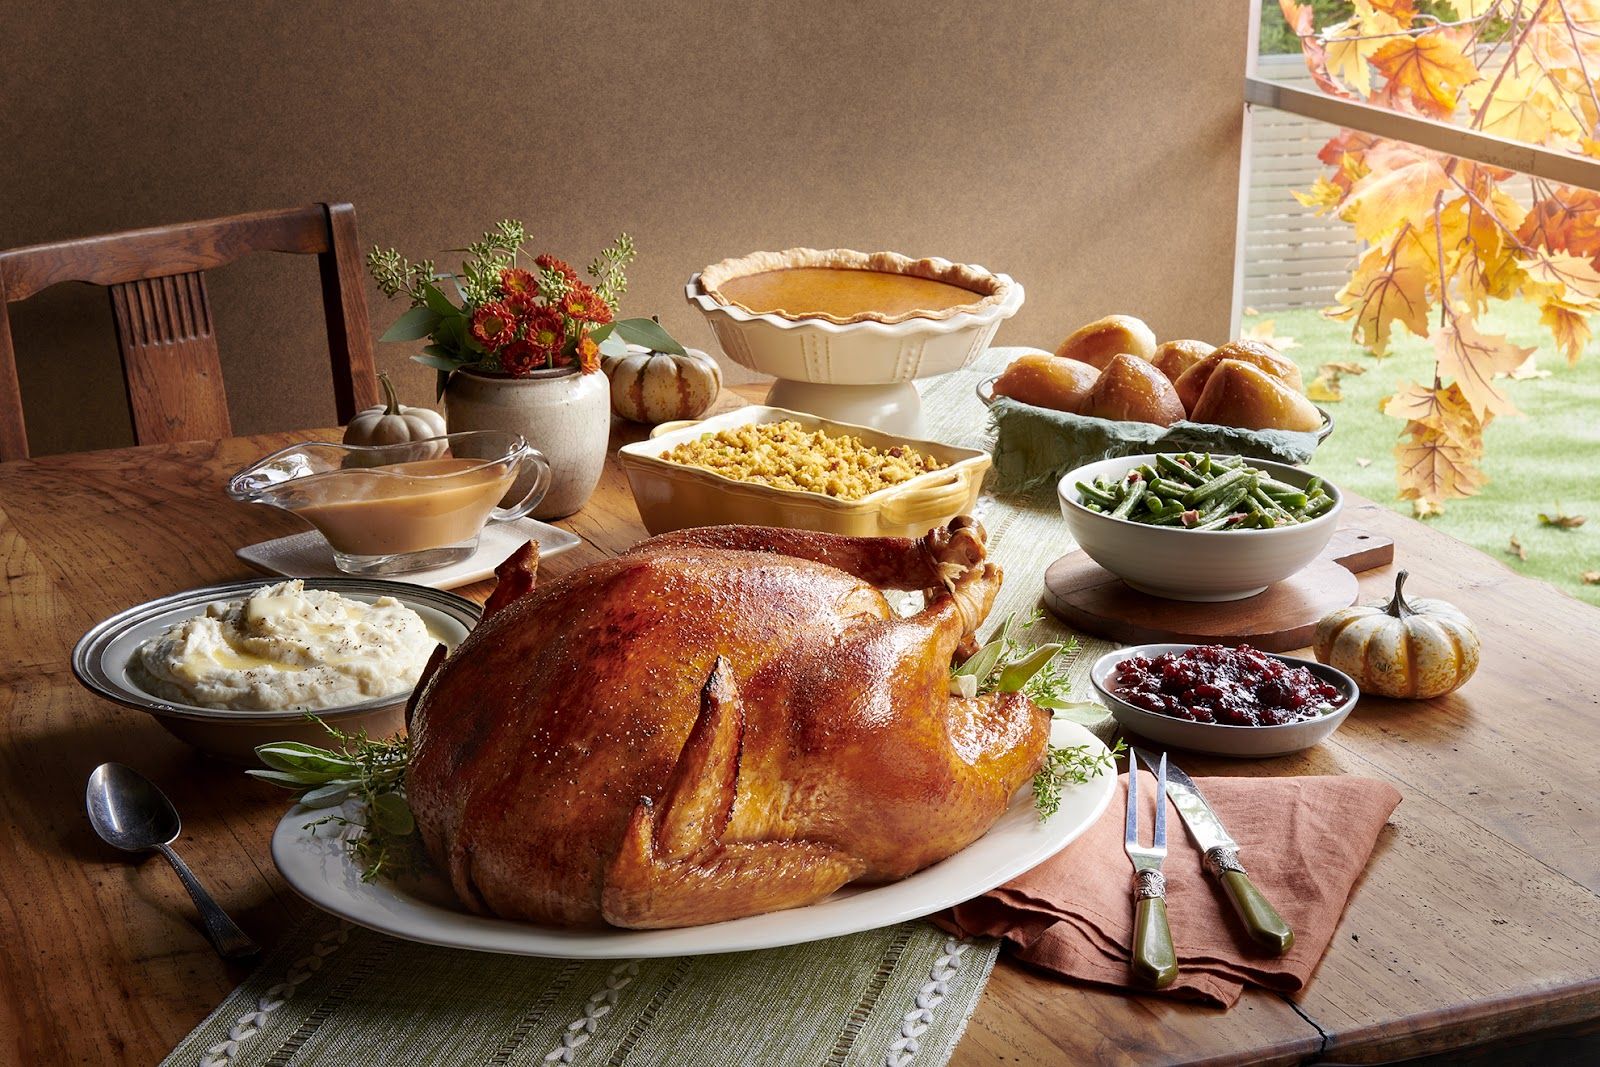 Golden Corral Kicks Off The Holiday Season with All the Fixings, None of the Stressing